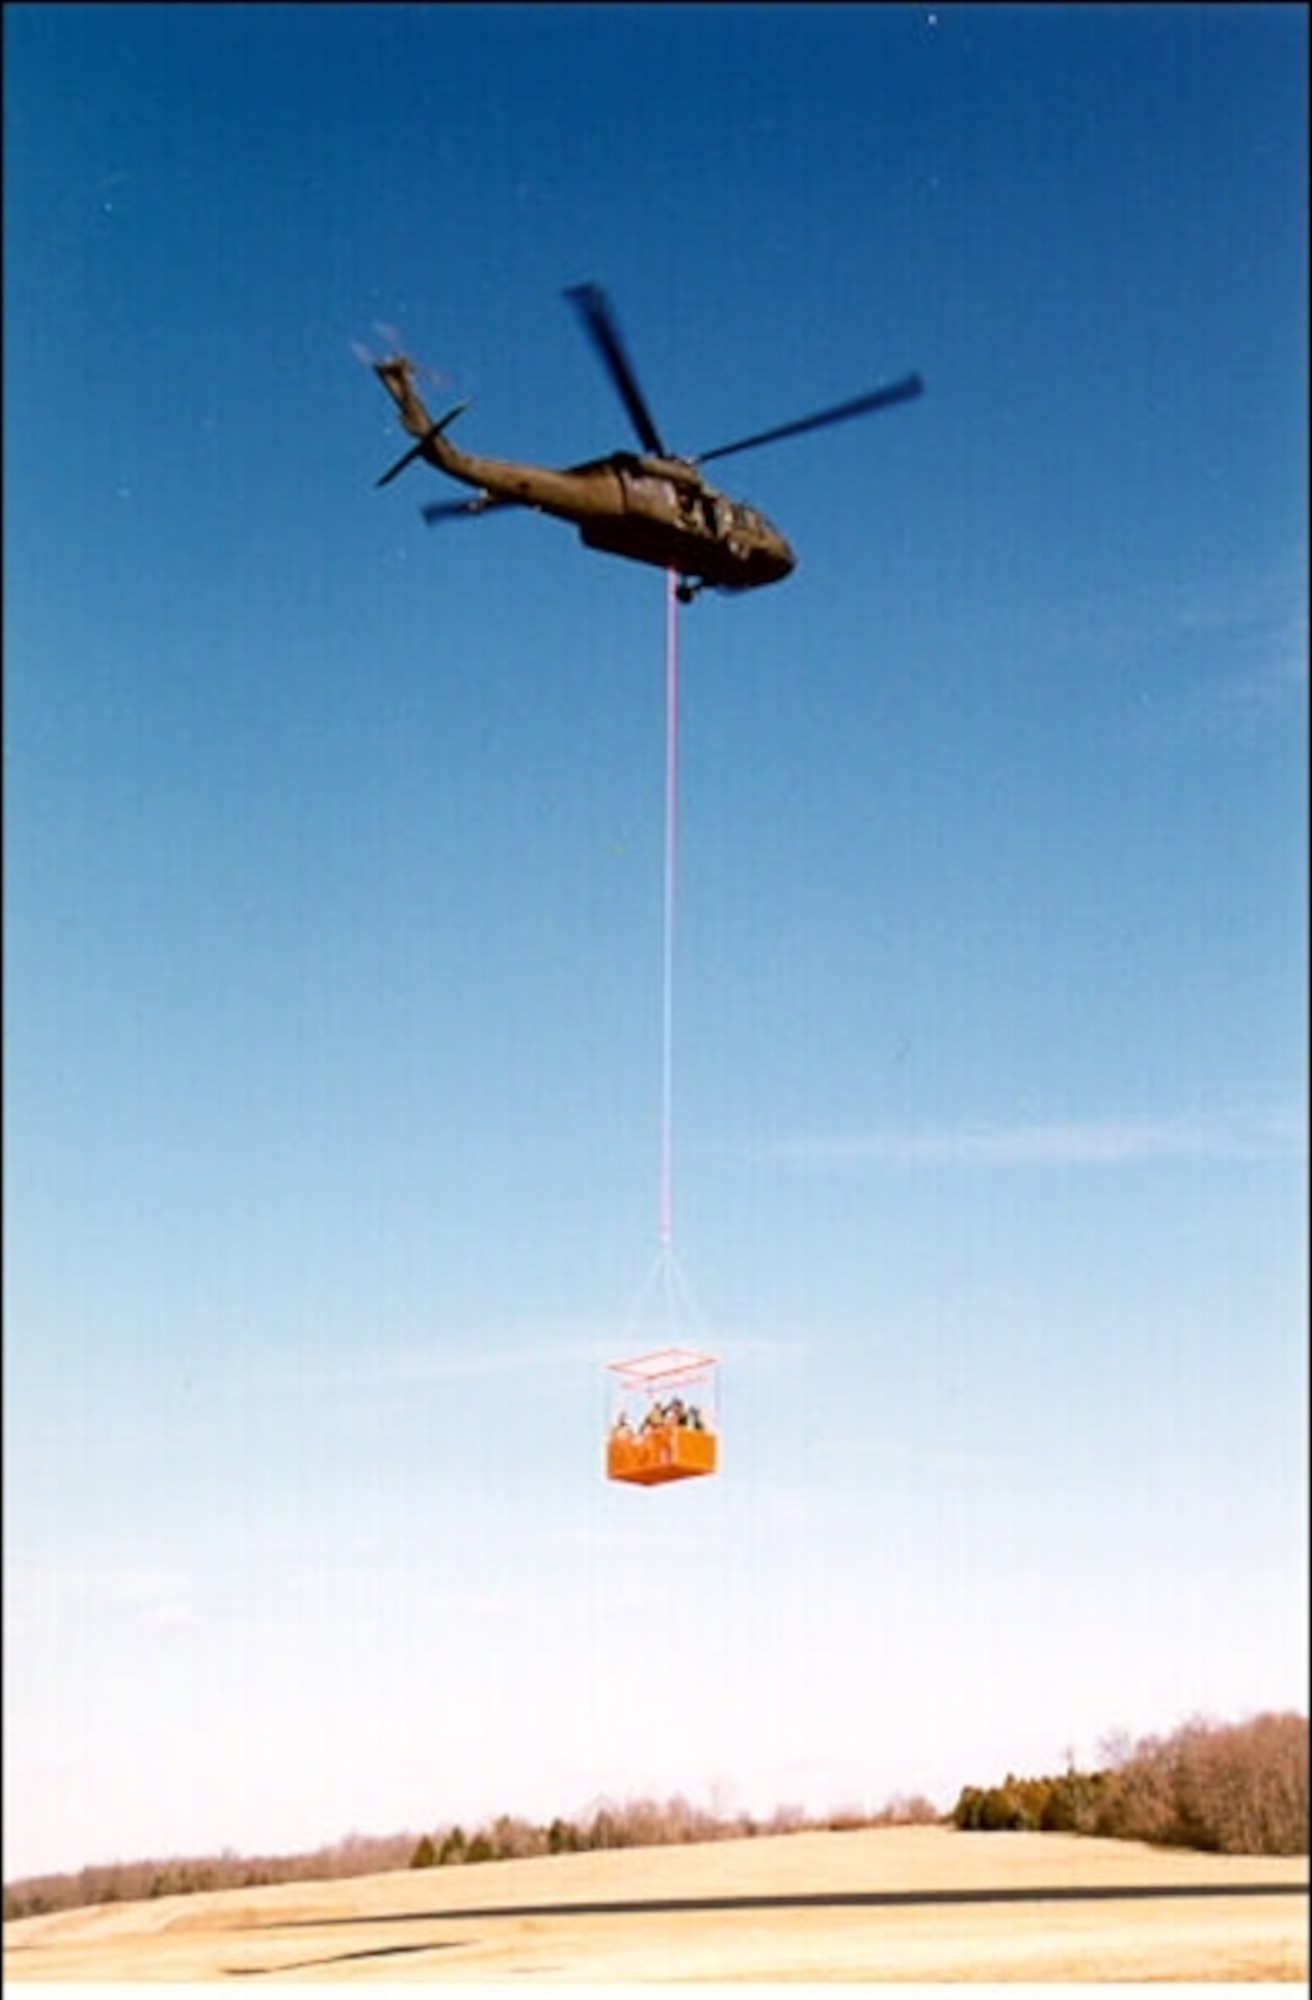 WRIGHT-PATTERSON AIR FORCE BASE, Ohio - (left) A Heli-Basket(r) is suspended beneath an HH-60 rescue helicopter. The Air Force Research Laboratory's Human Effectiveness Directorate provided guidance on flight tests and did data analysis for evaluating the basket's safety as a human rescue tool. The Heli-Basket would enable rescuers to quickly extract up to 15 people trapped in areas unsuitable for helicopter landings. Originally a cargo carrier, it was adapted and tested to meet a Homeland Defense requirement for short-range human rescue in disaster situations. (Precision Lift, Inc. courtesy photo)



